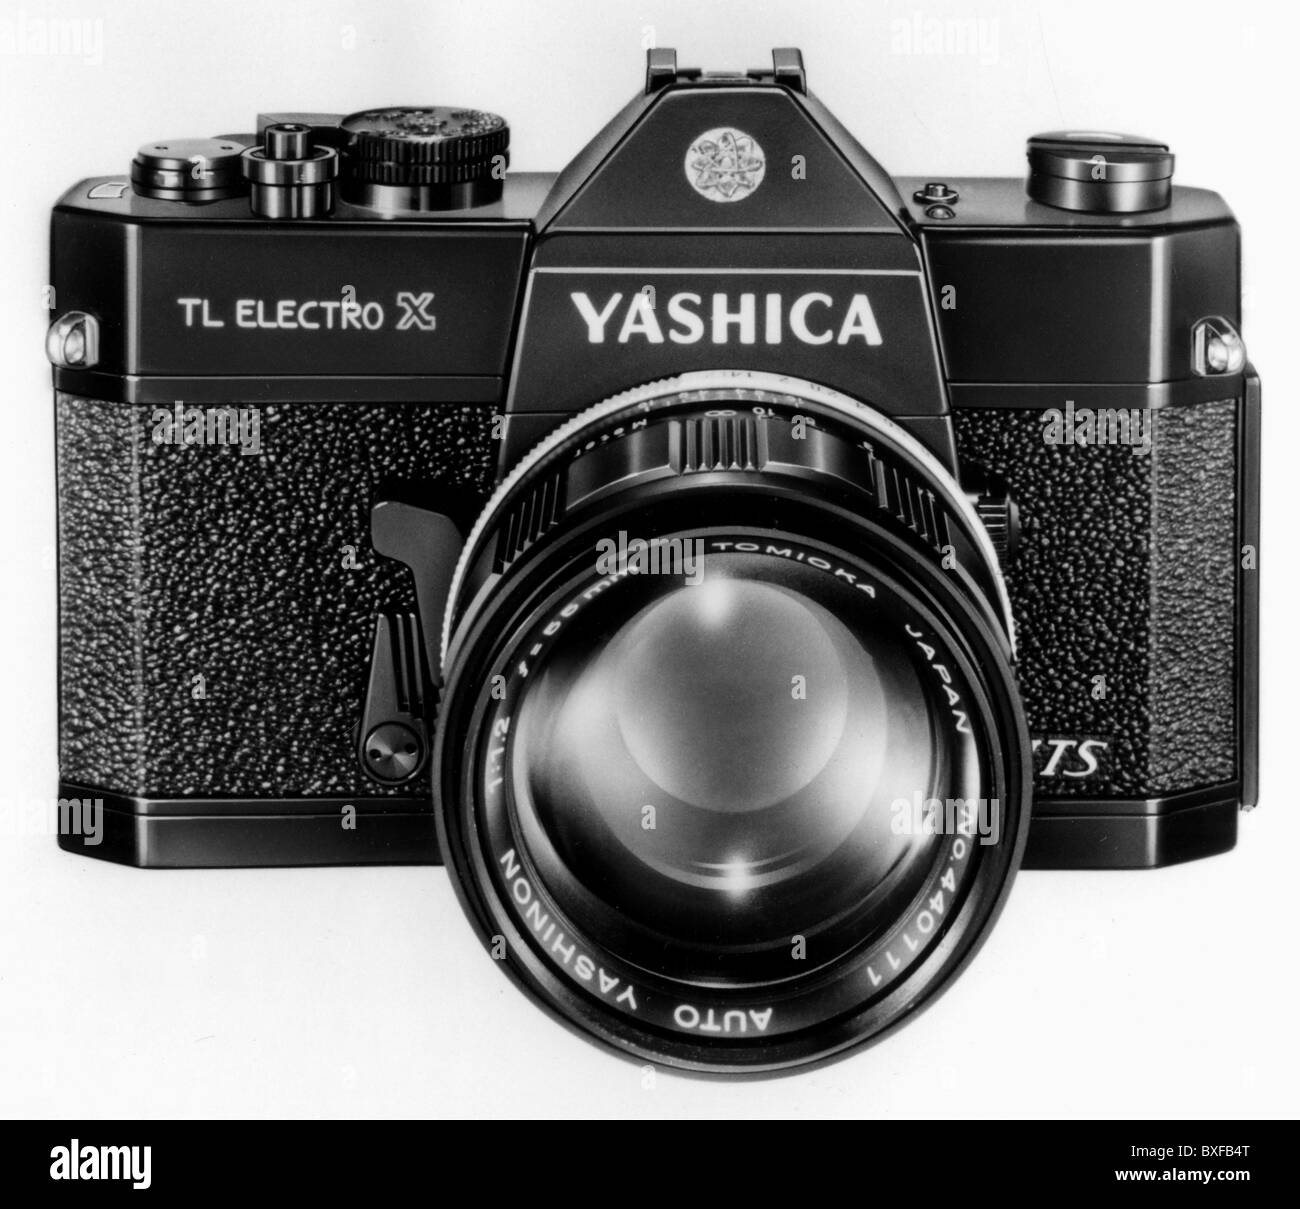 Fotografie, Kameras, Yashica TL Electro X, Japan, 1968 - 1974, zusätzliche-Rights-Clearences-not available Stockfoto